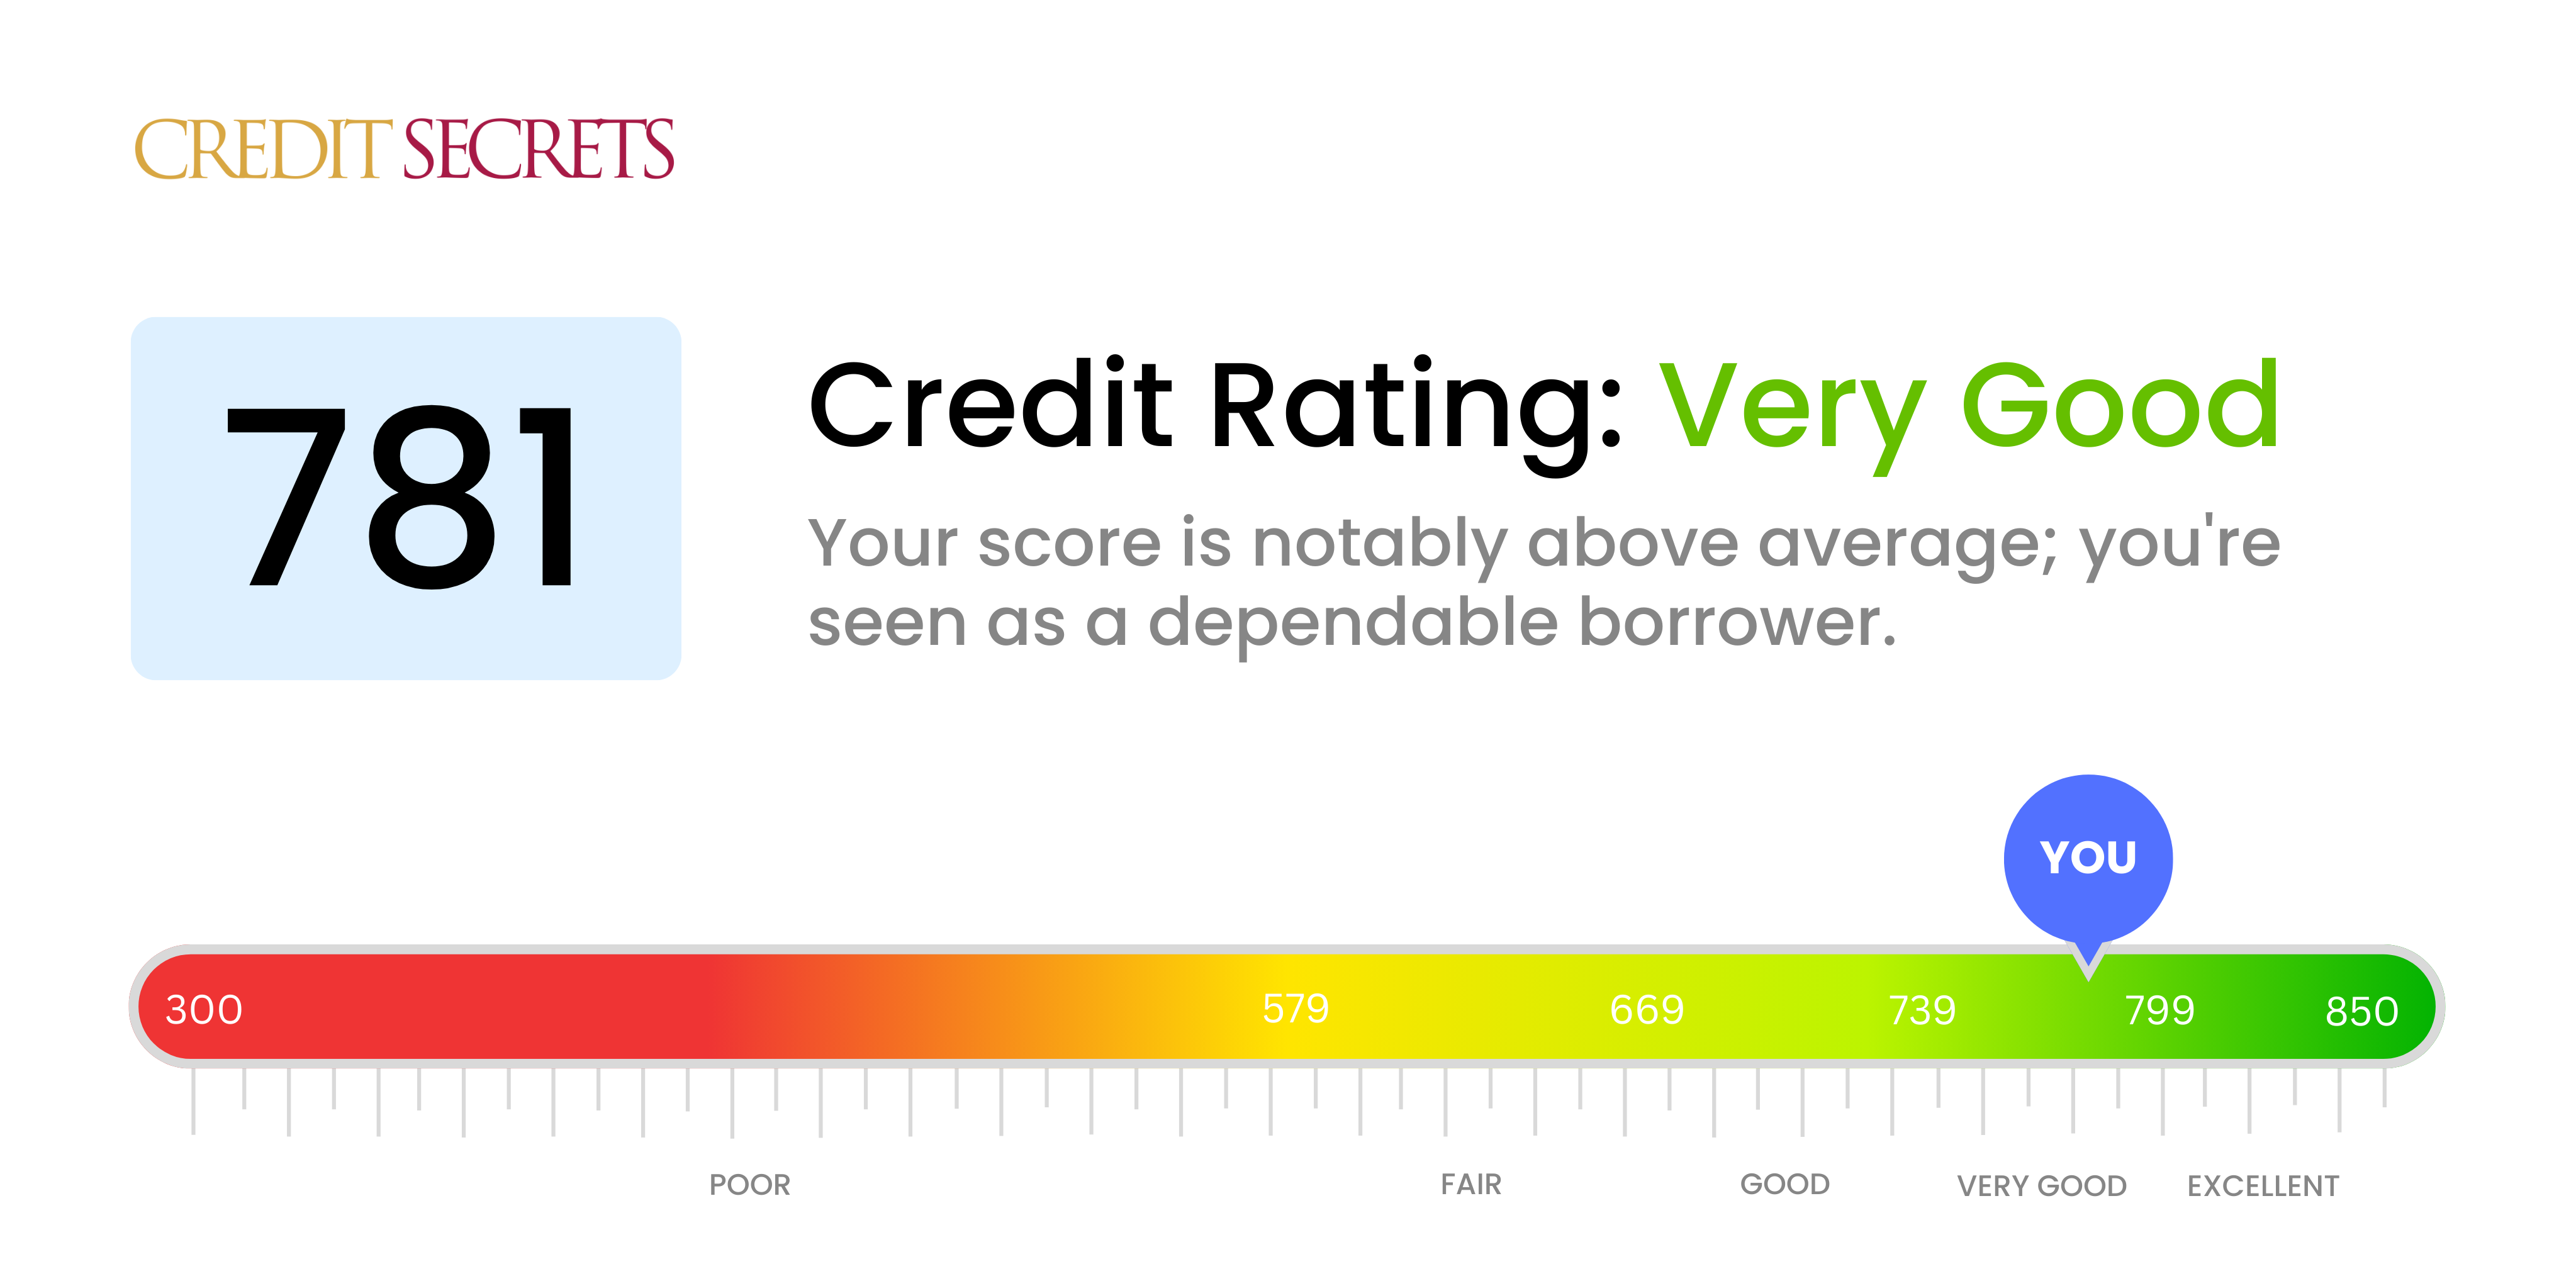 Is 781 a good credit score?